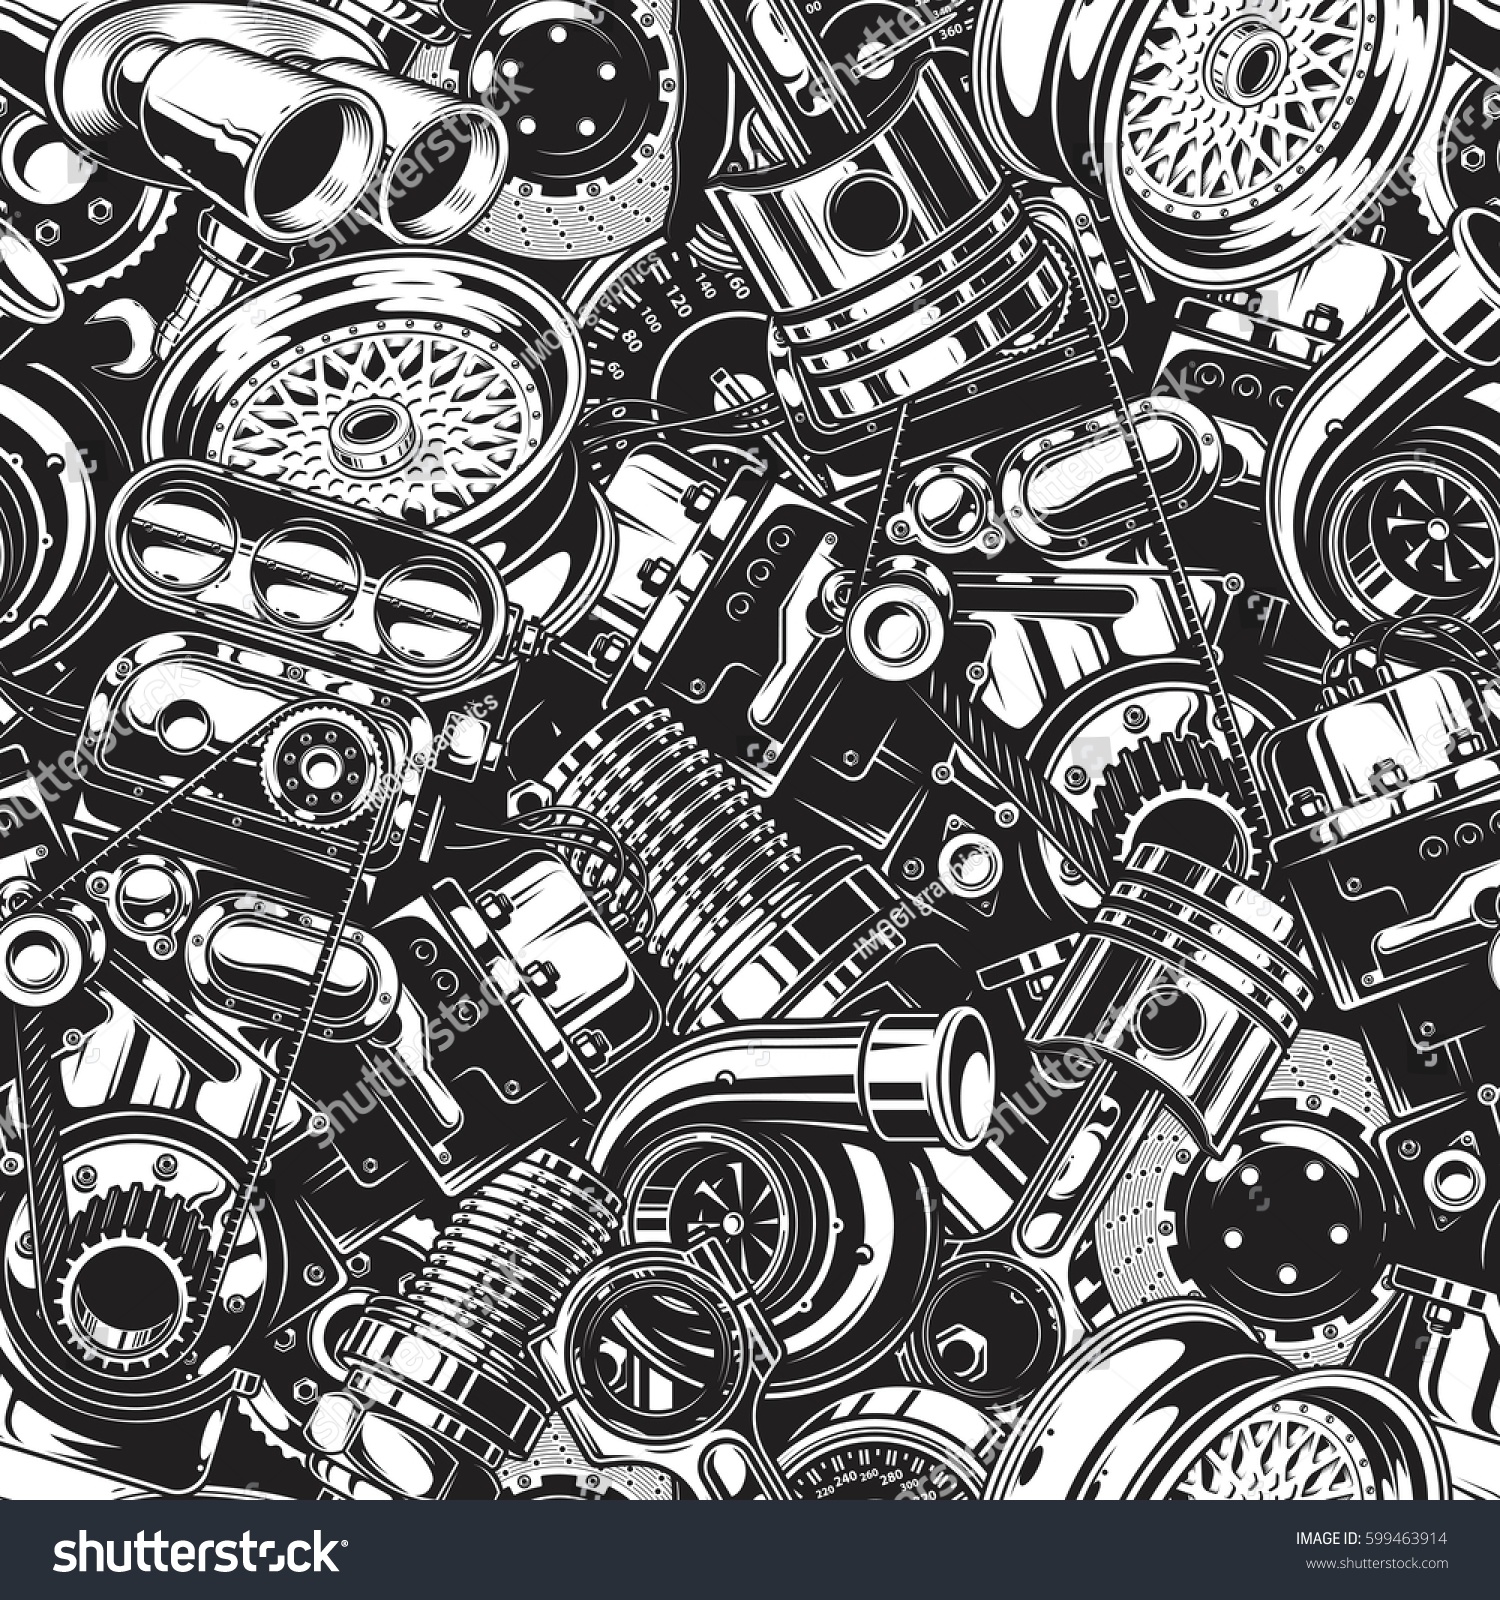 SVG of Automobile car parts seamless pattern with monochrome black and white elements background. svg